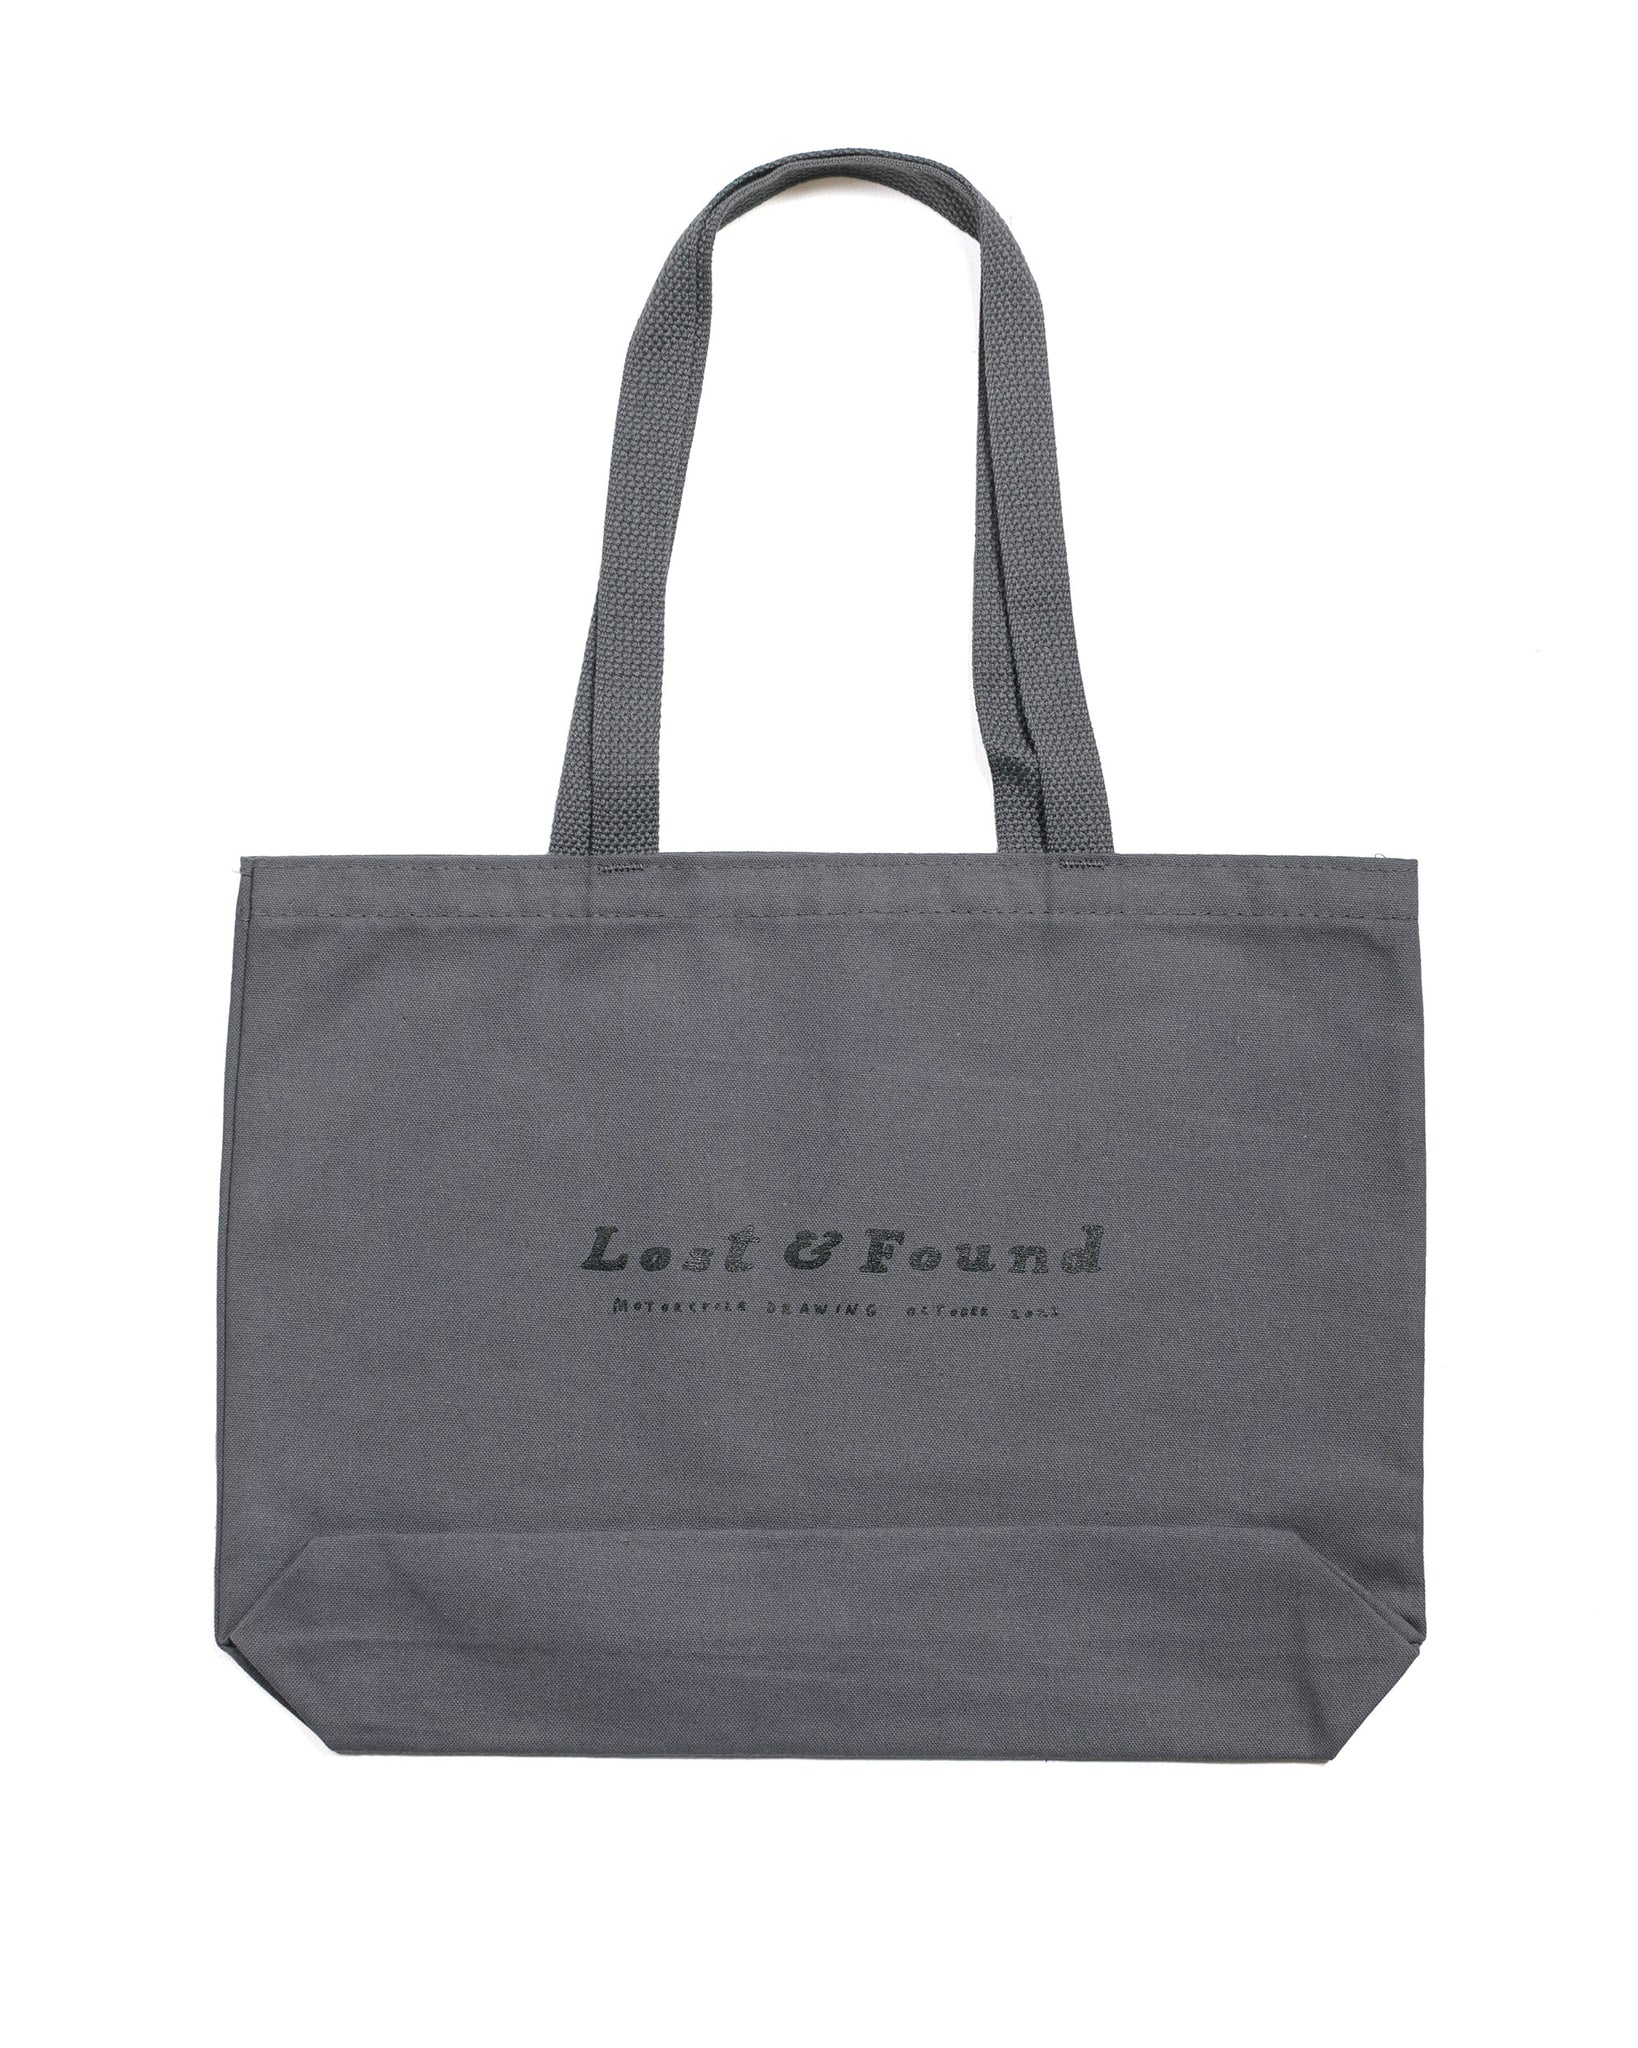 Lost & Found Motorcycle Tote Bag back